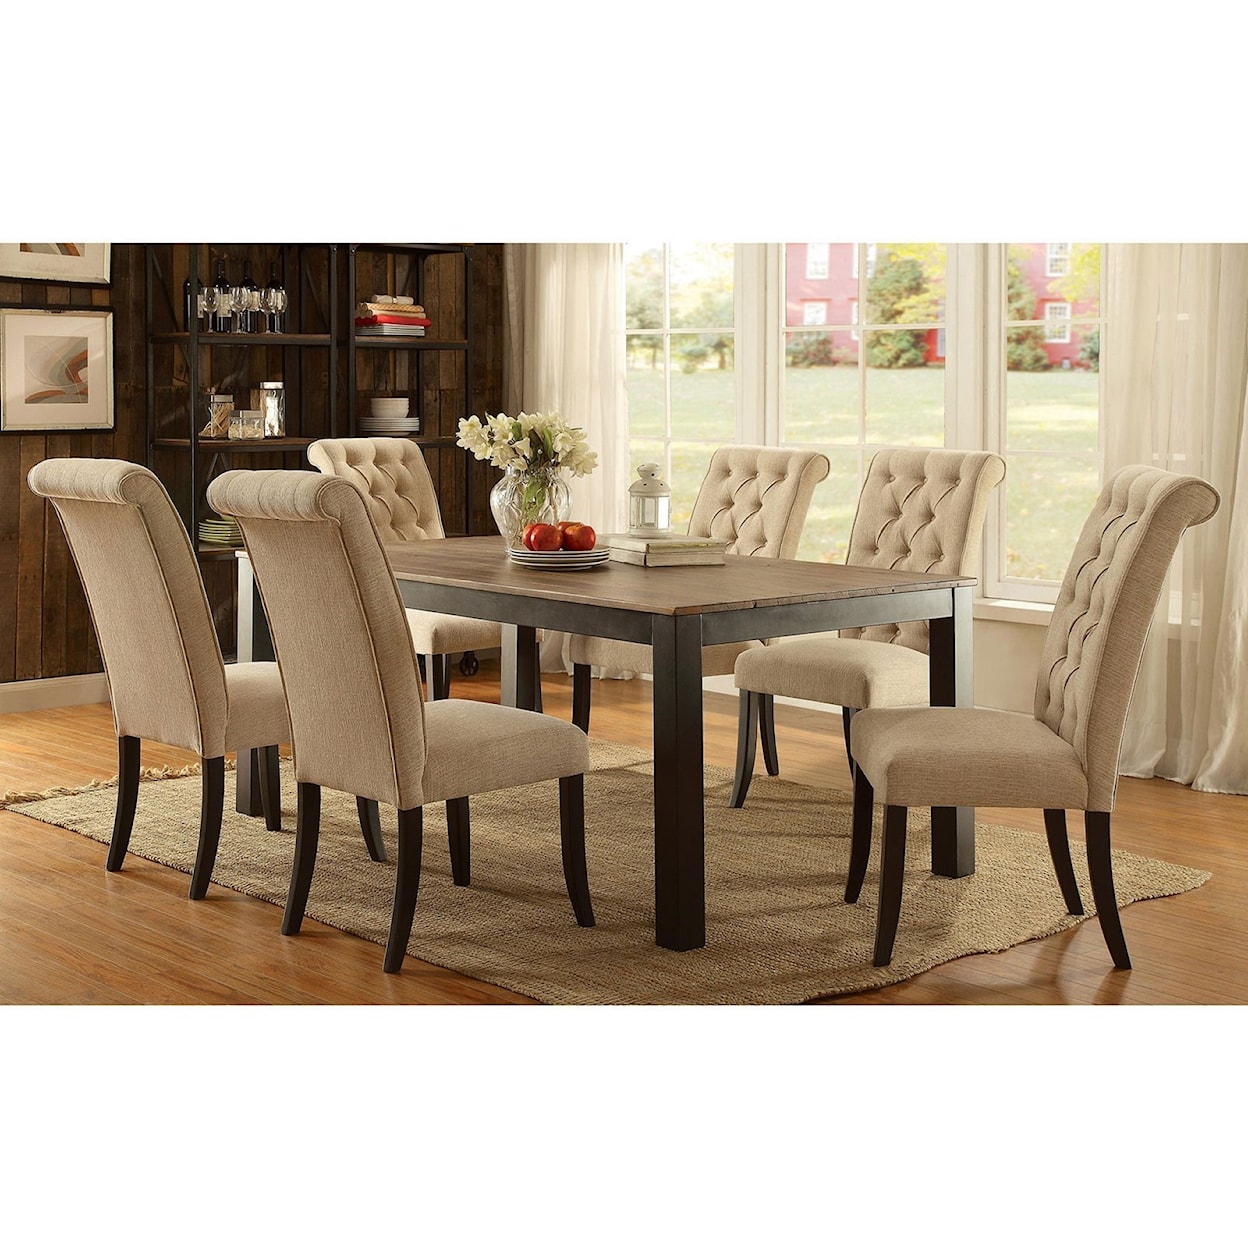 Furniture of America Marshall Dining Table